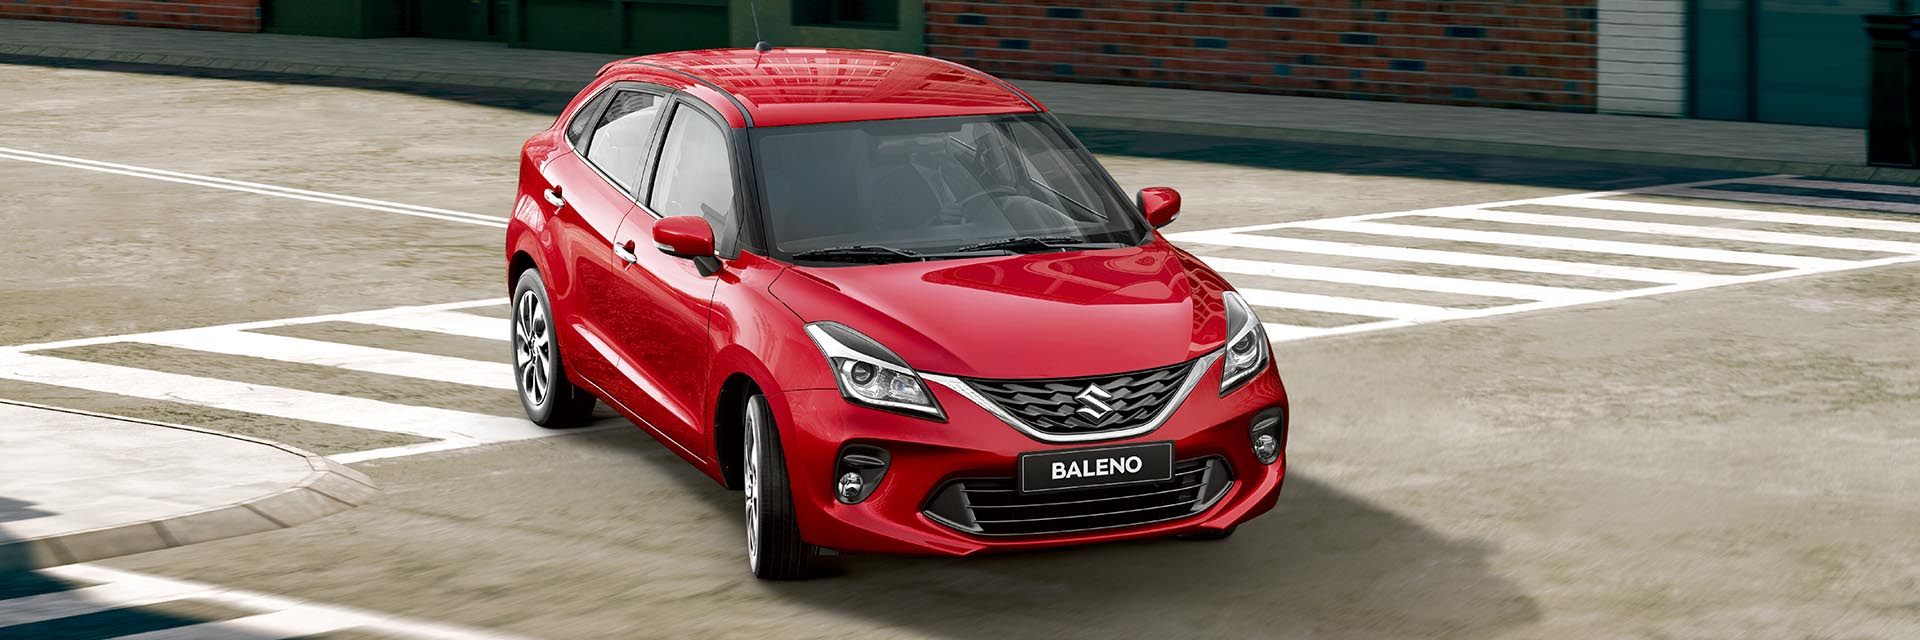 Baleno Overview 3